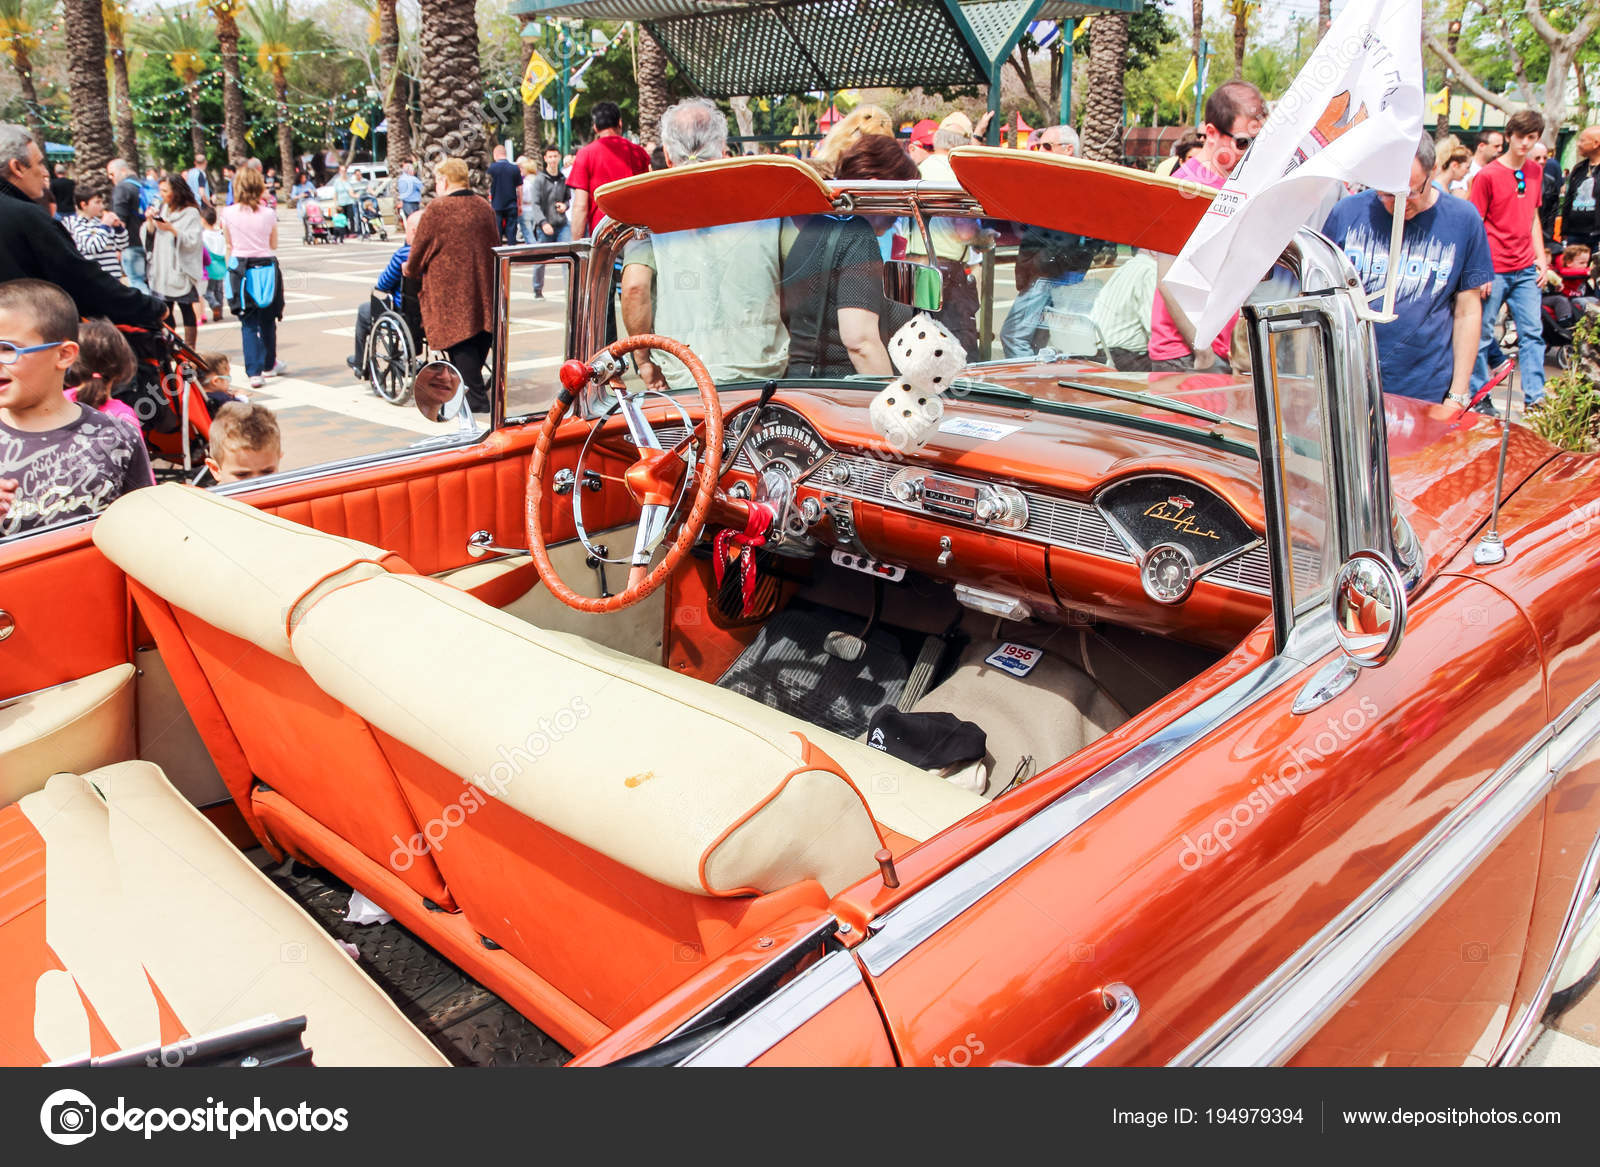 Interior Of Old Chevrolet Bel Air 1956 Cabriolet At An